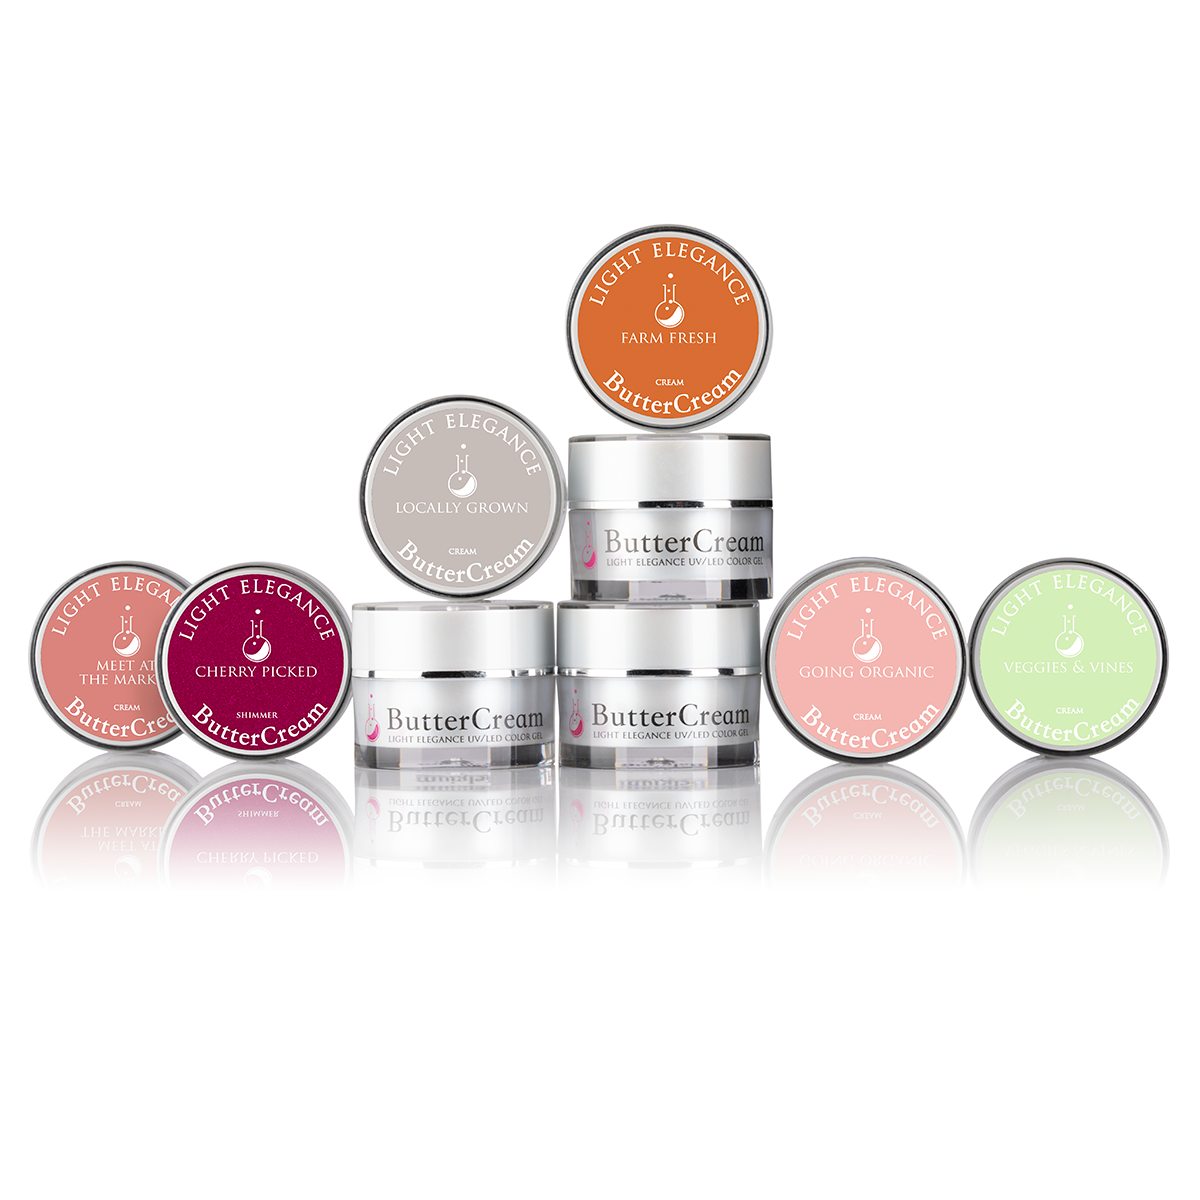 Light Elegance ButterCreams Collection Spring 2022 - Farmers Market - Creata Beauty - Professional Beauty Products